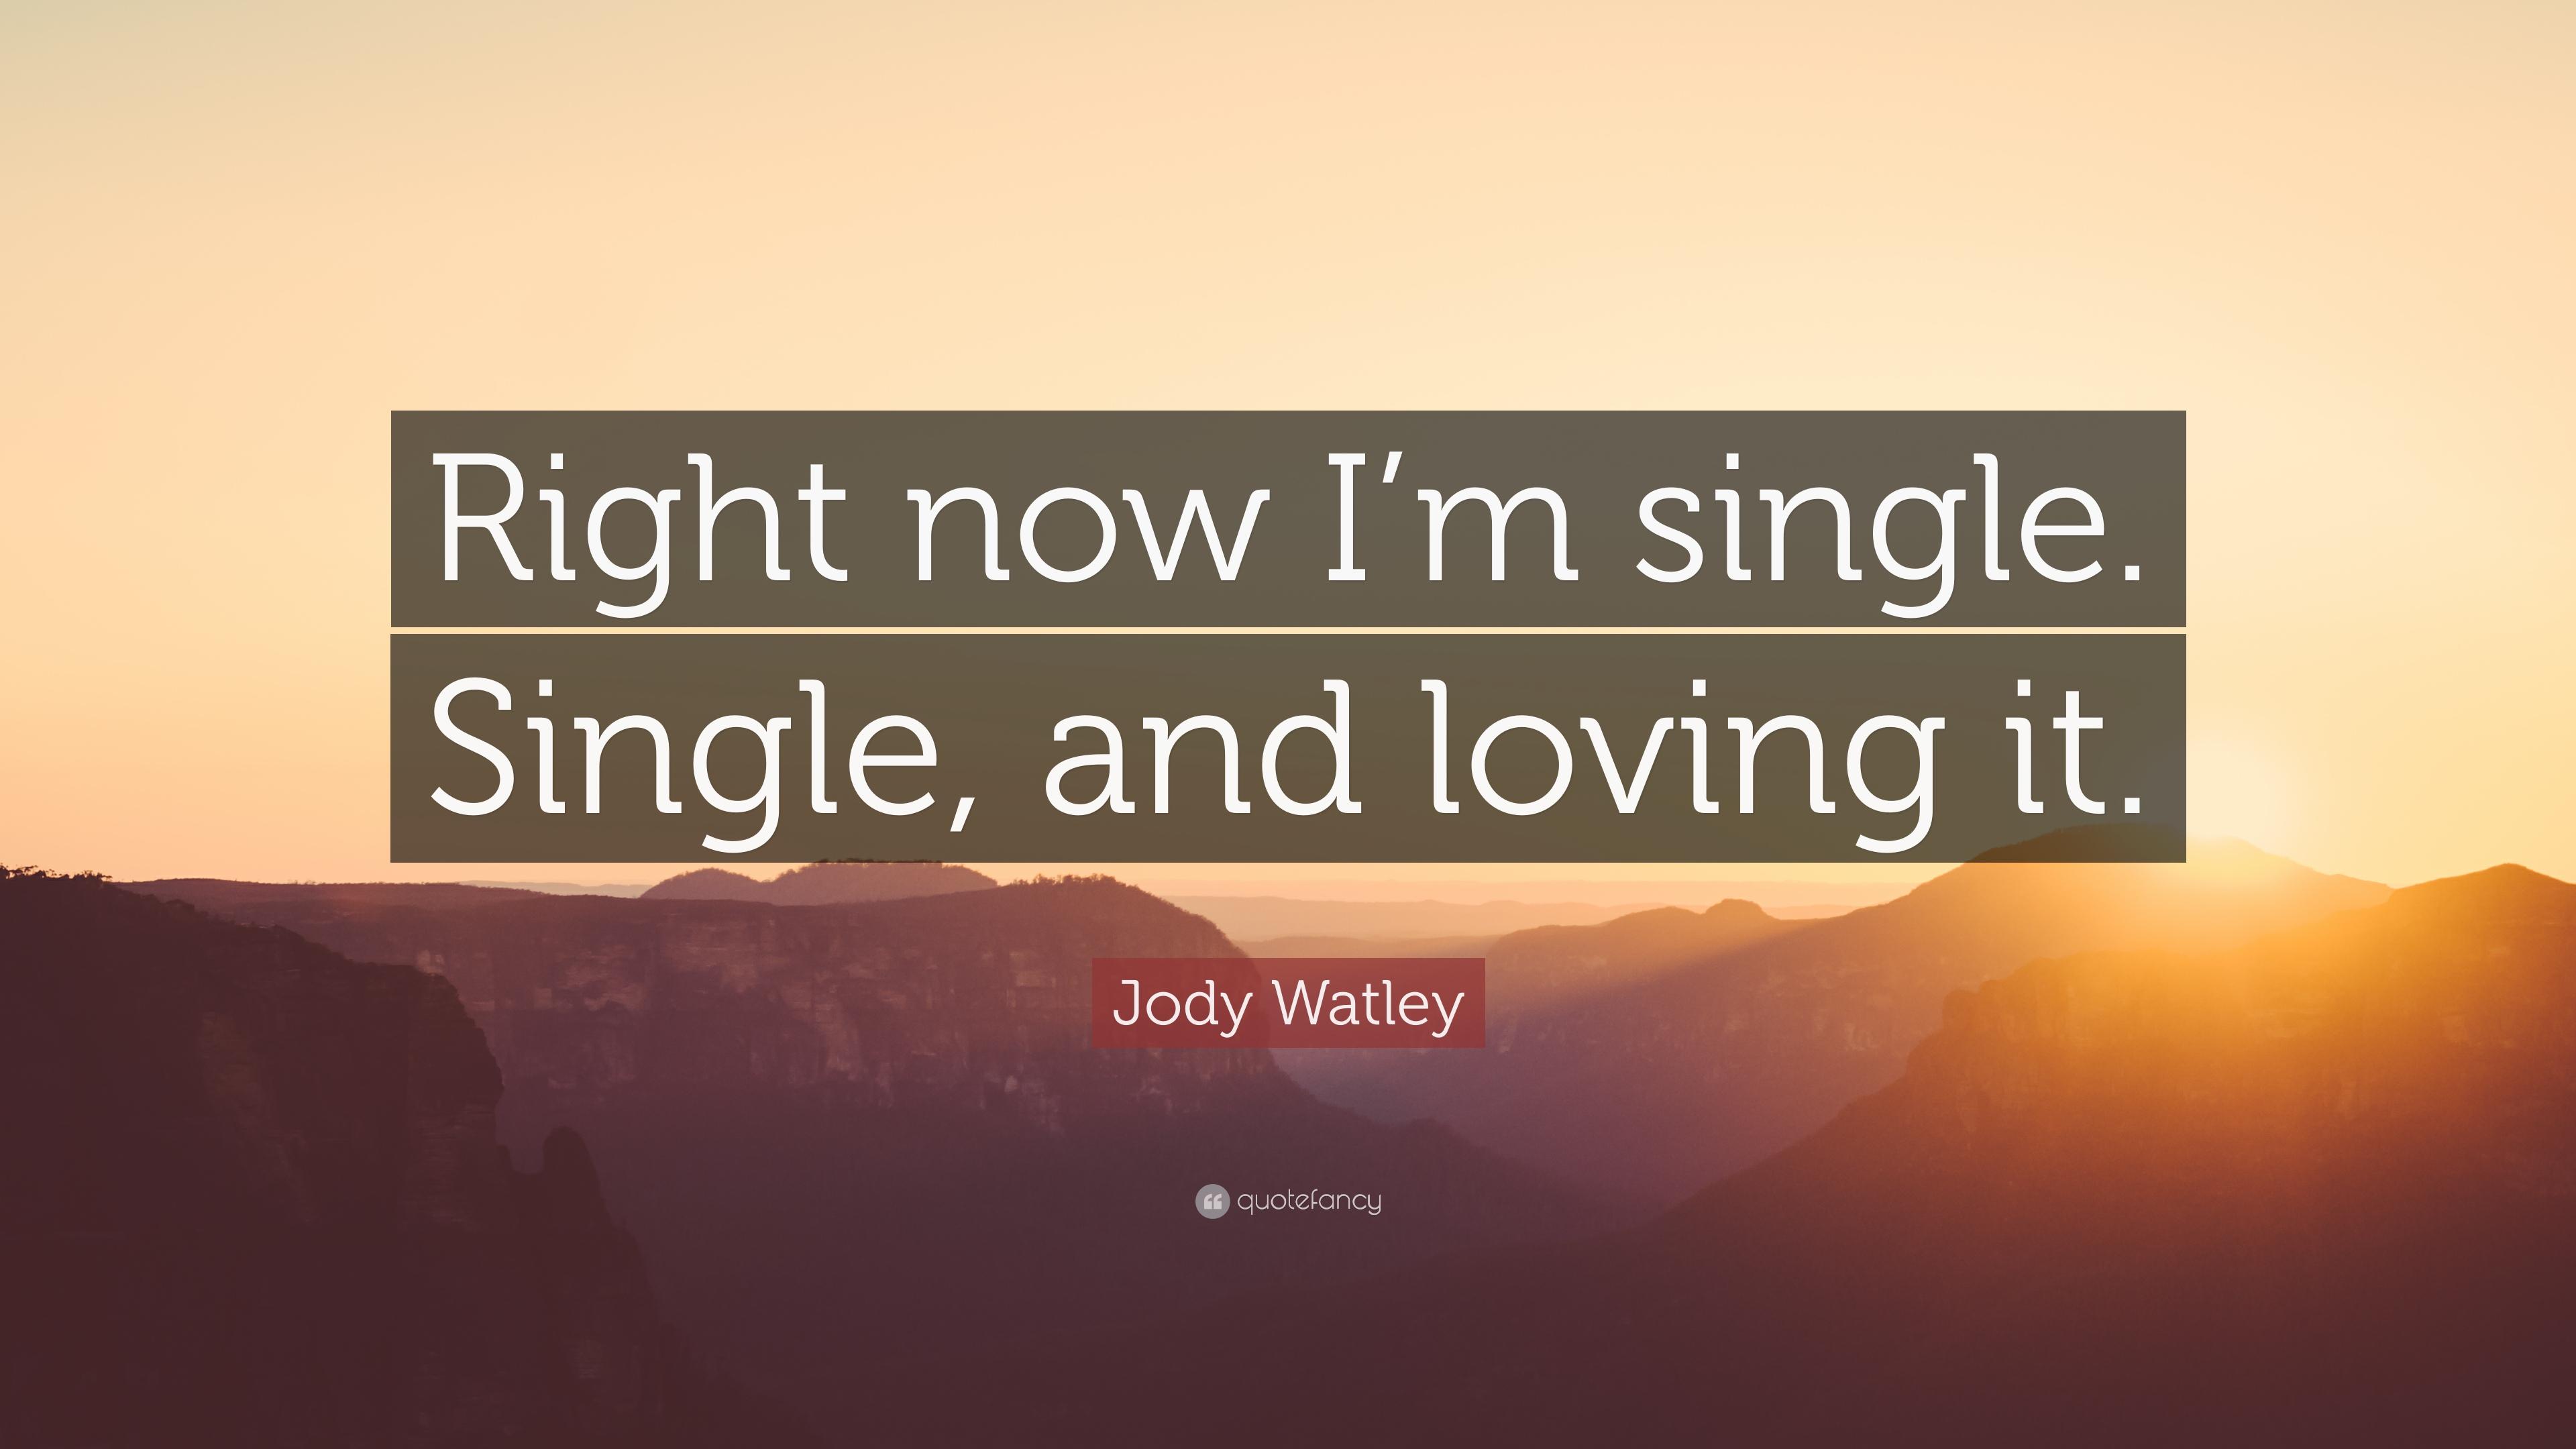 Jody Watley Quote: “Right now I'm single. Single, and loving it